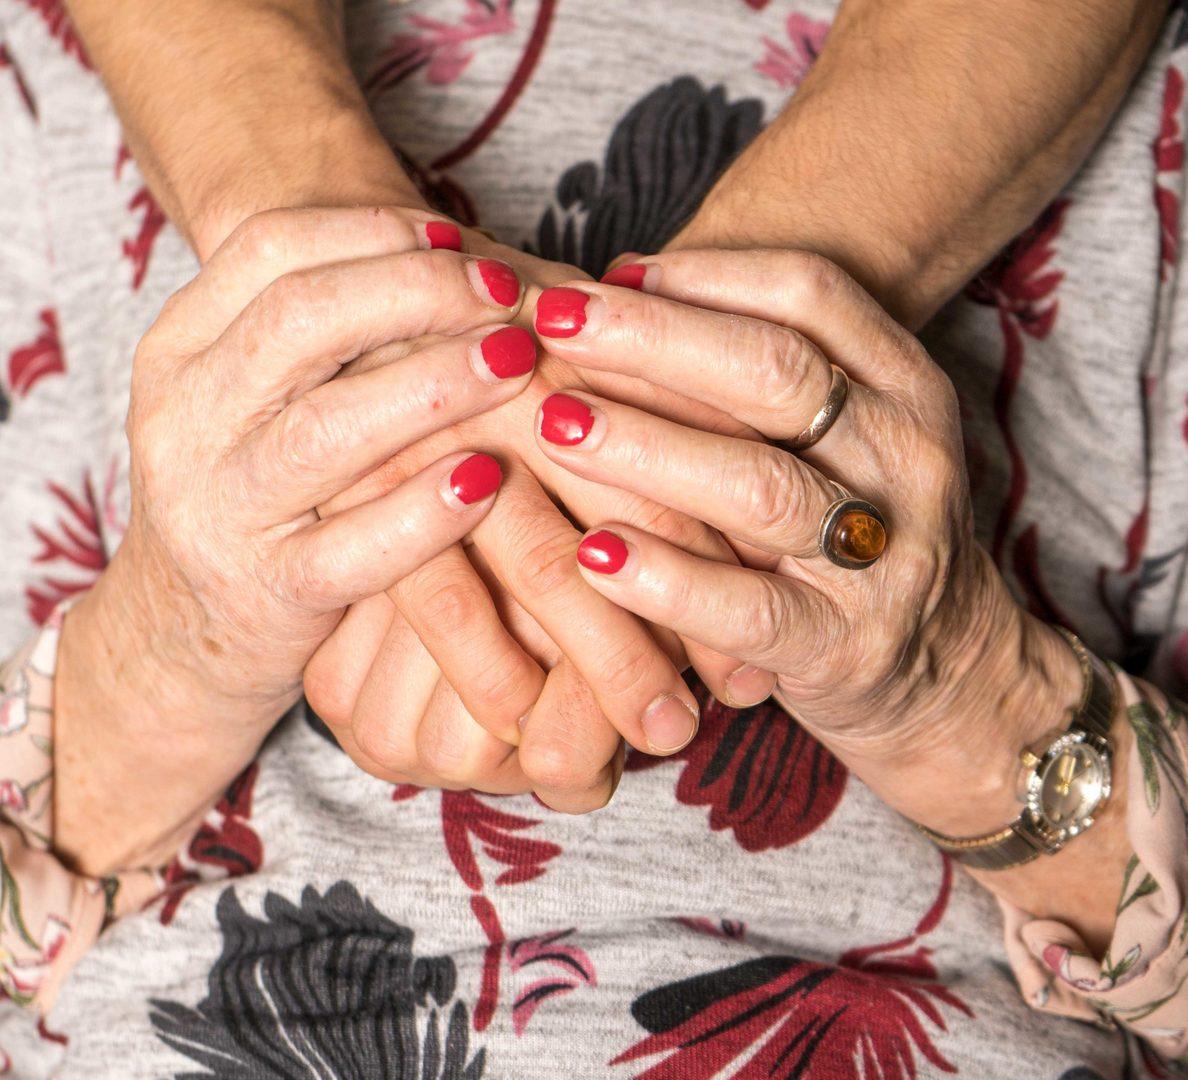 A photo of hands holding hands